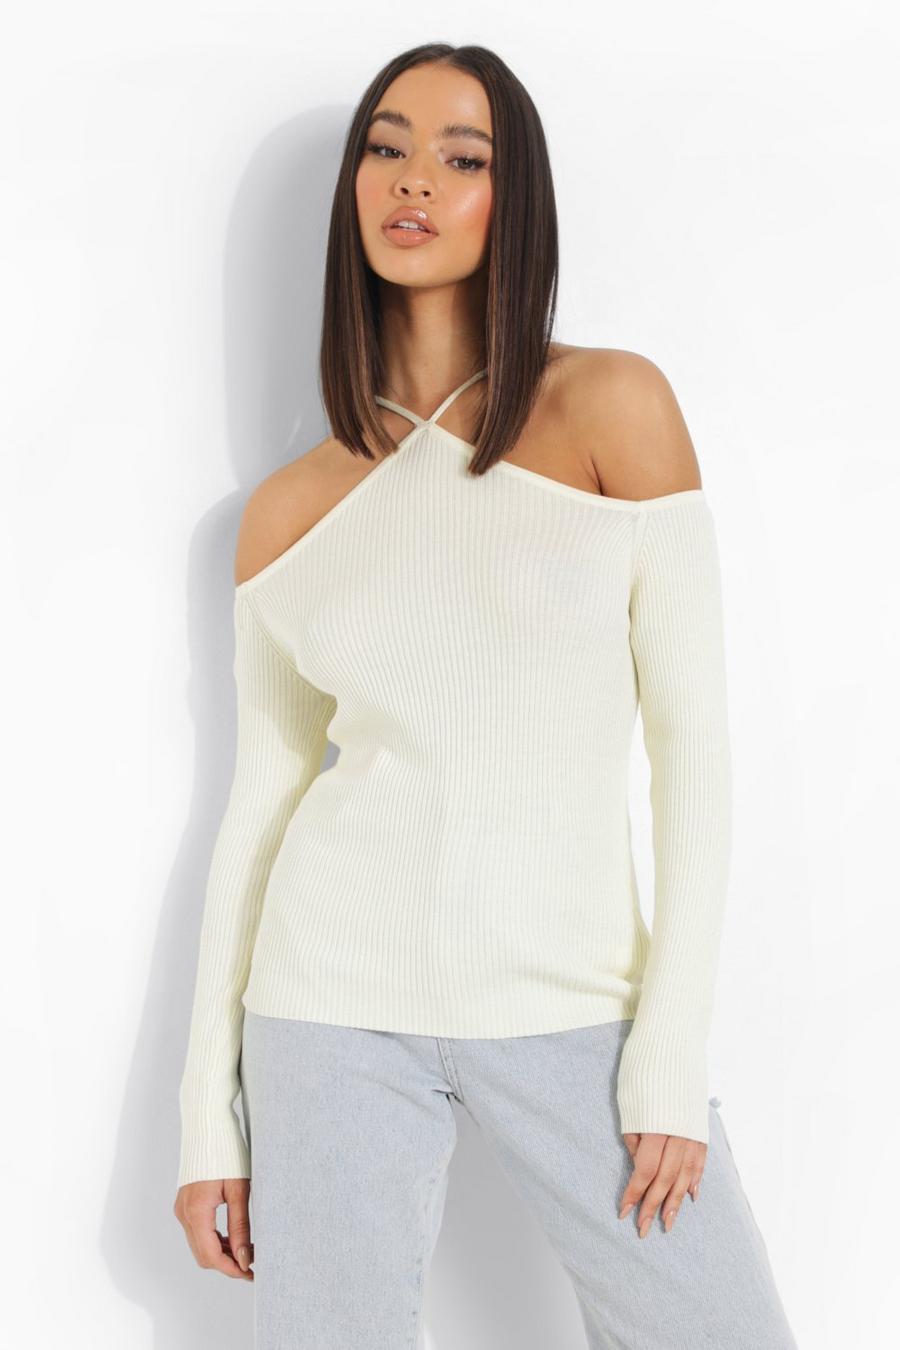 Lemon Strappy Neckline Rib Knitted Sweater image number 1